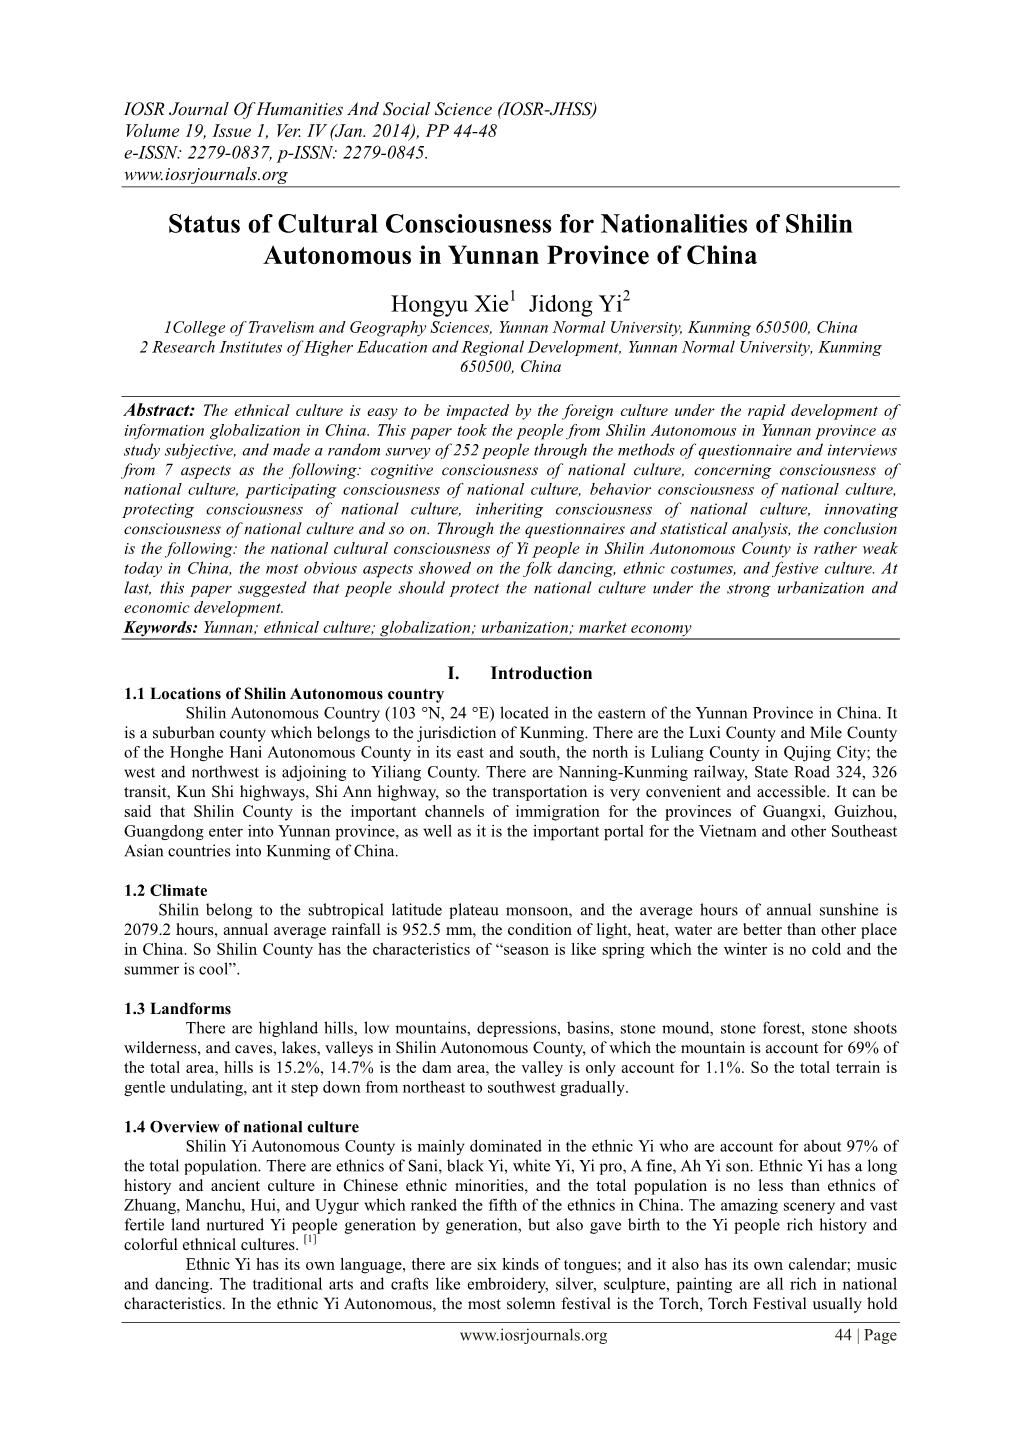 Status of Cultural Consciousness for Nationalities of Shilin Autonomous in Yunnan Province of China